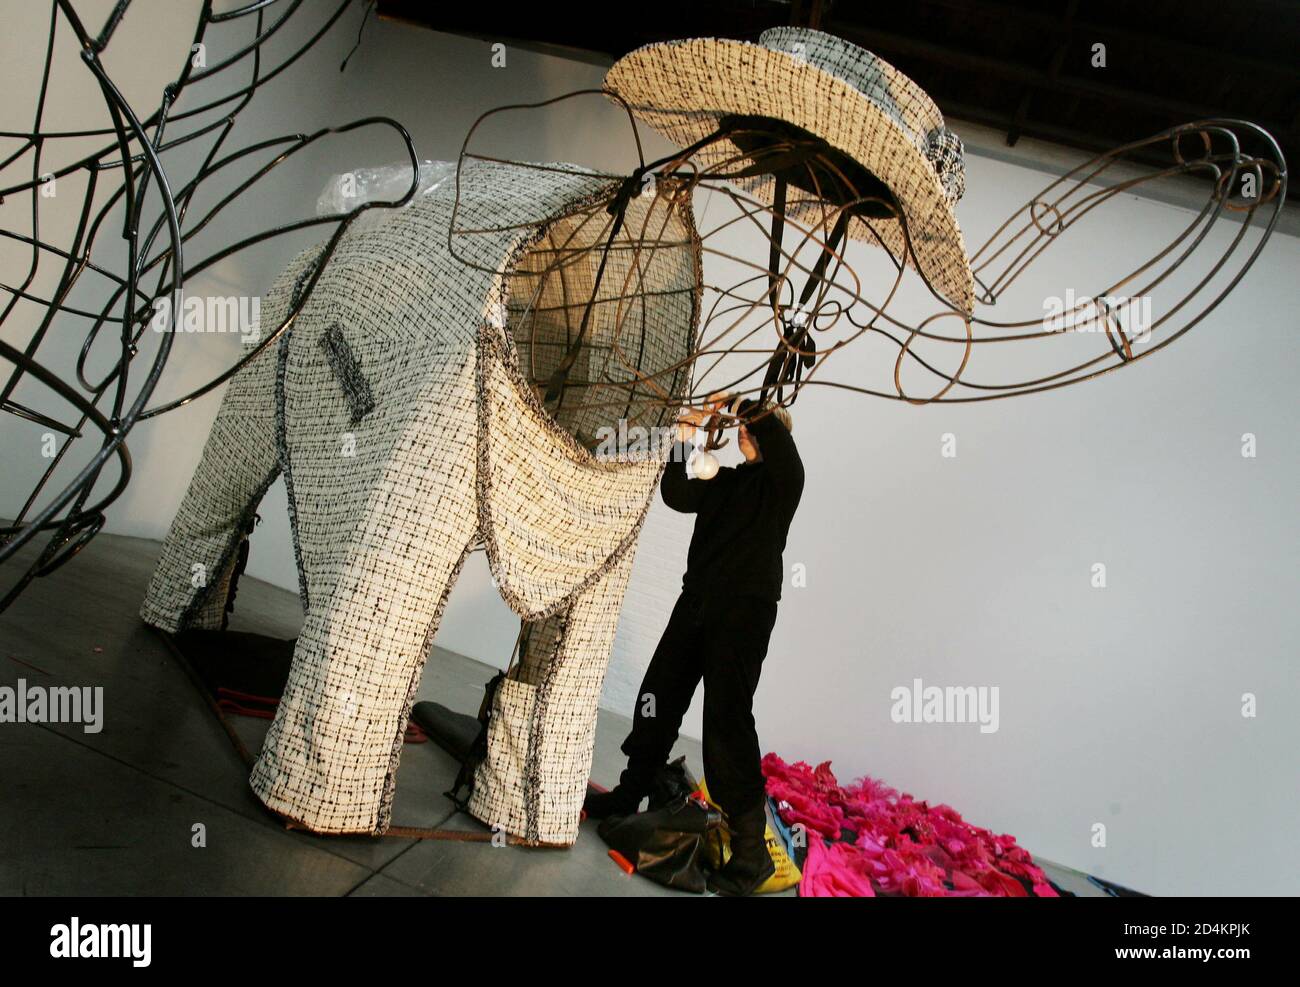 A worker dresses a giant wire elephant with a custom made outfit by  Designer Karl Lagerfeld in preparation for a W Magazine exhibition in New  York, December 7, 2004. [W Magazine asked